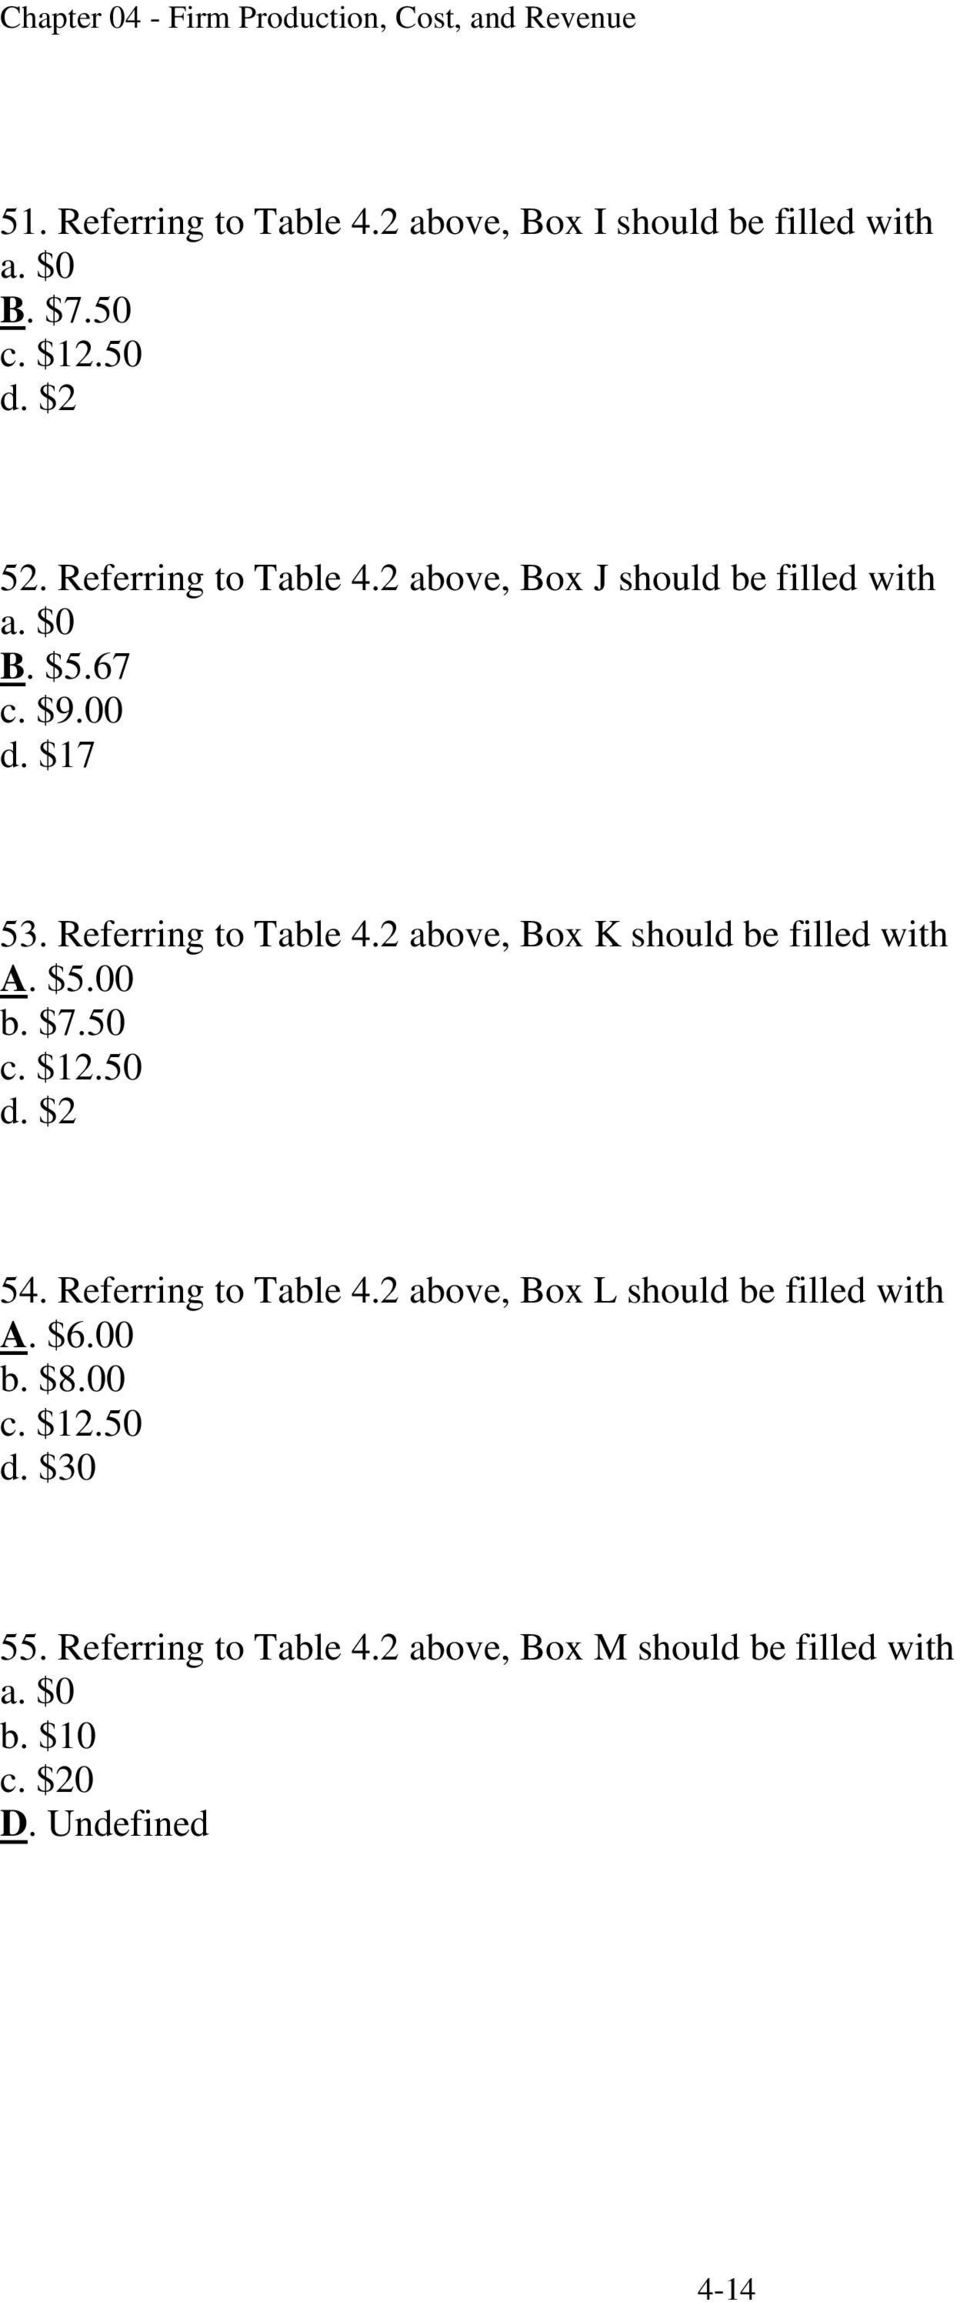 $2 54. Referring to Table 4.2 above, Box L should be filled with A. $6.00 b. $8.00 c. $12.50 d. $30 55.